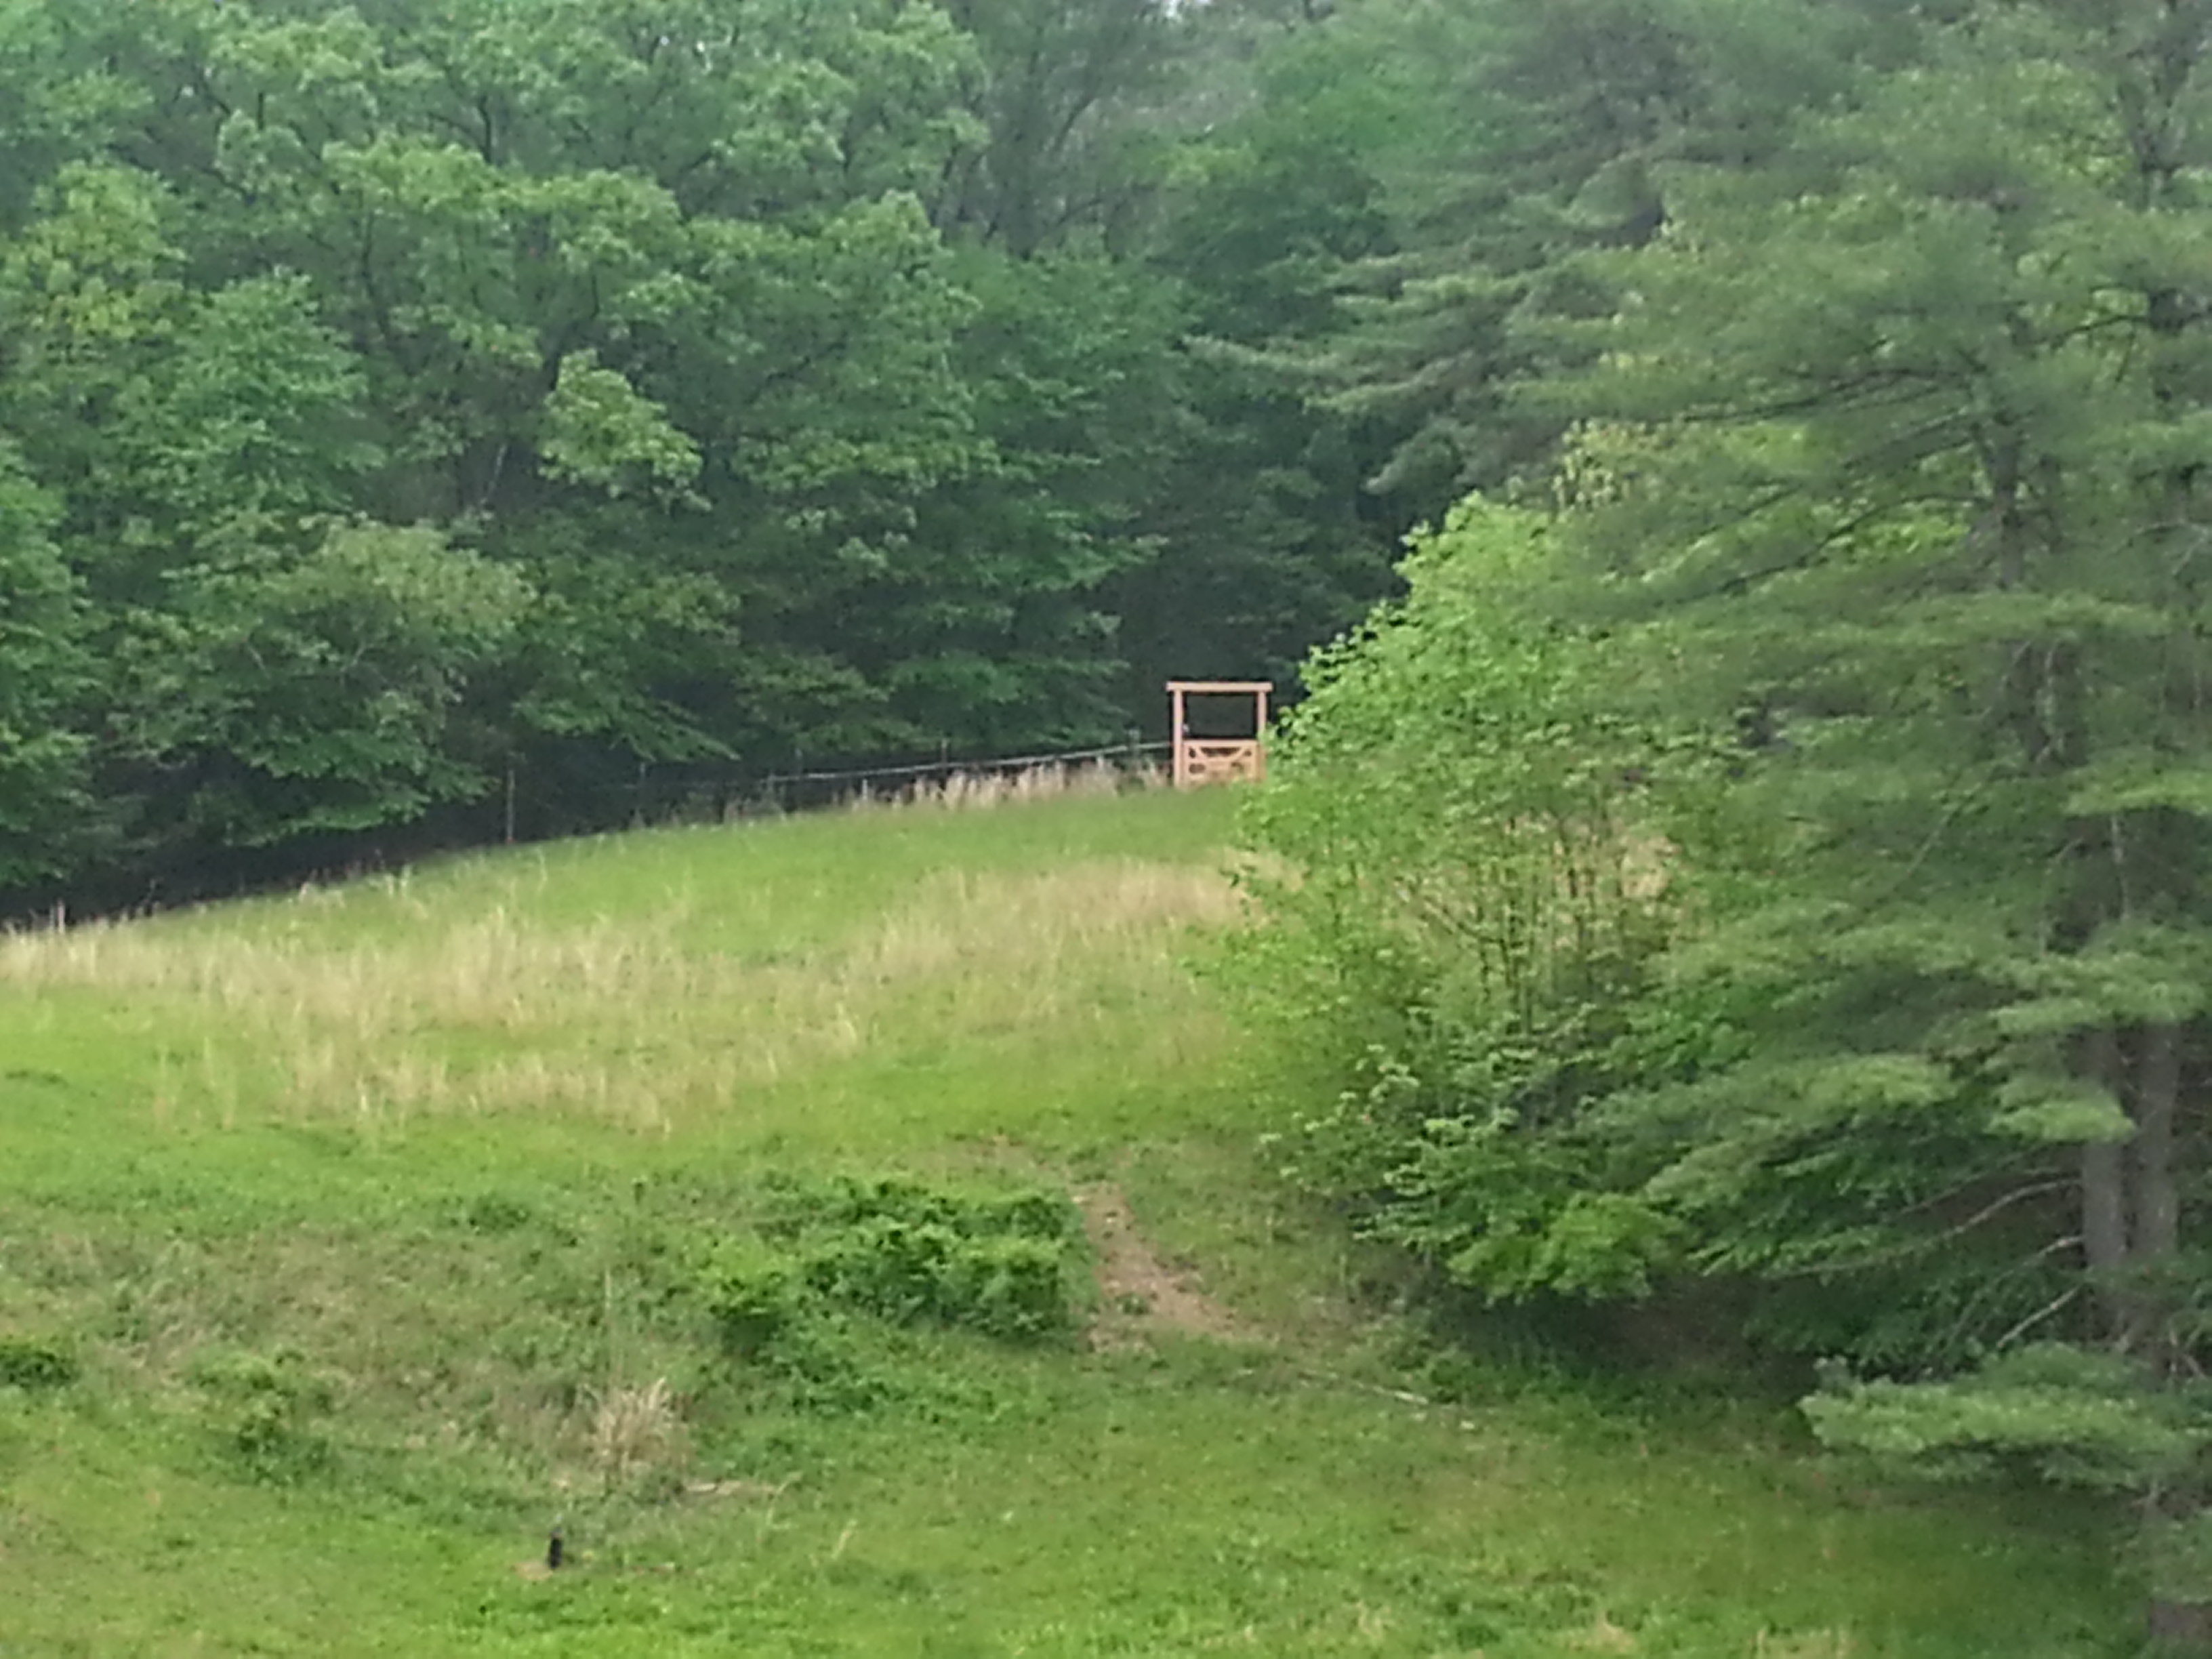 Gate at other end of pasture. Property goes beyond that